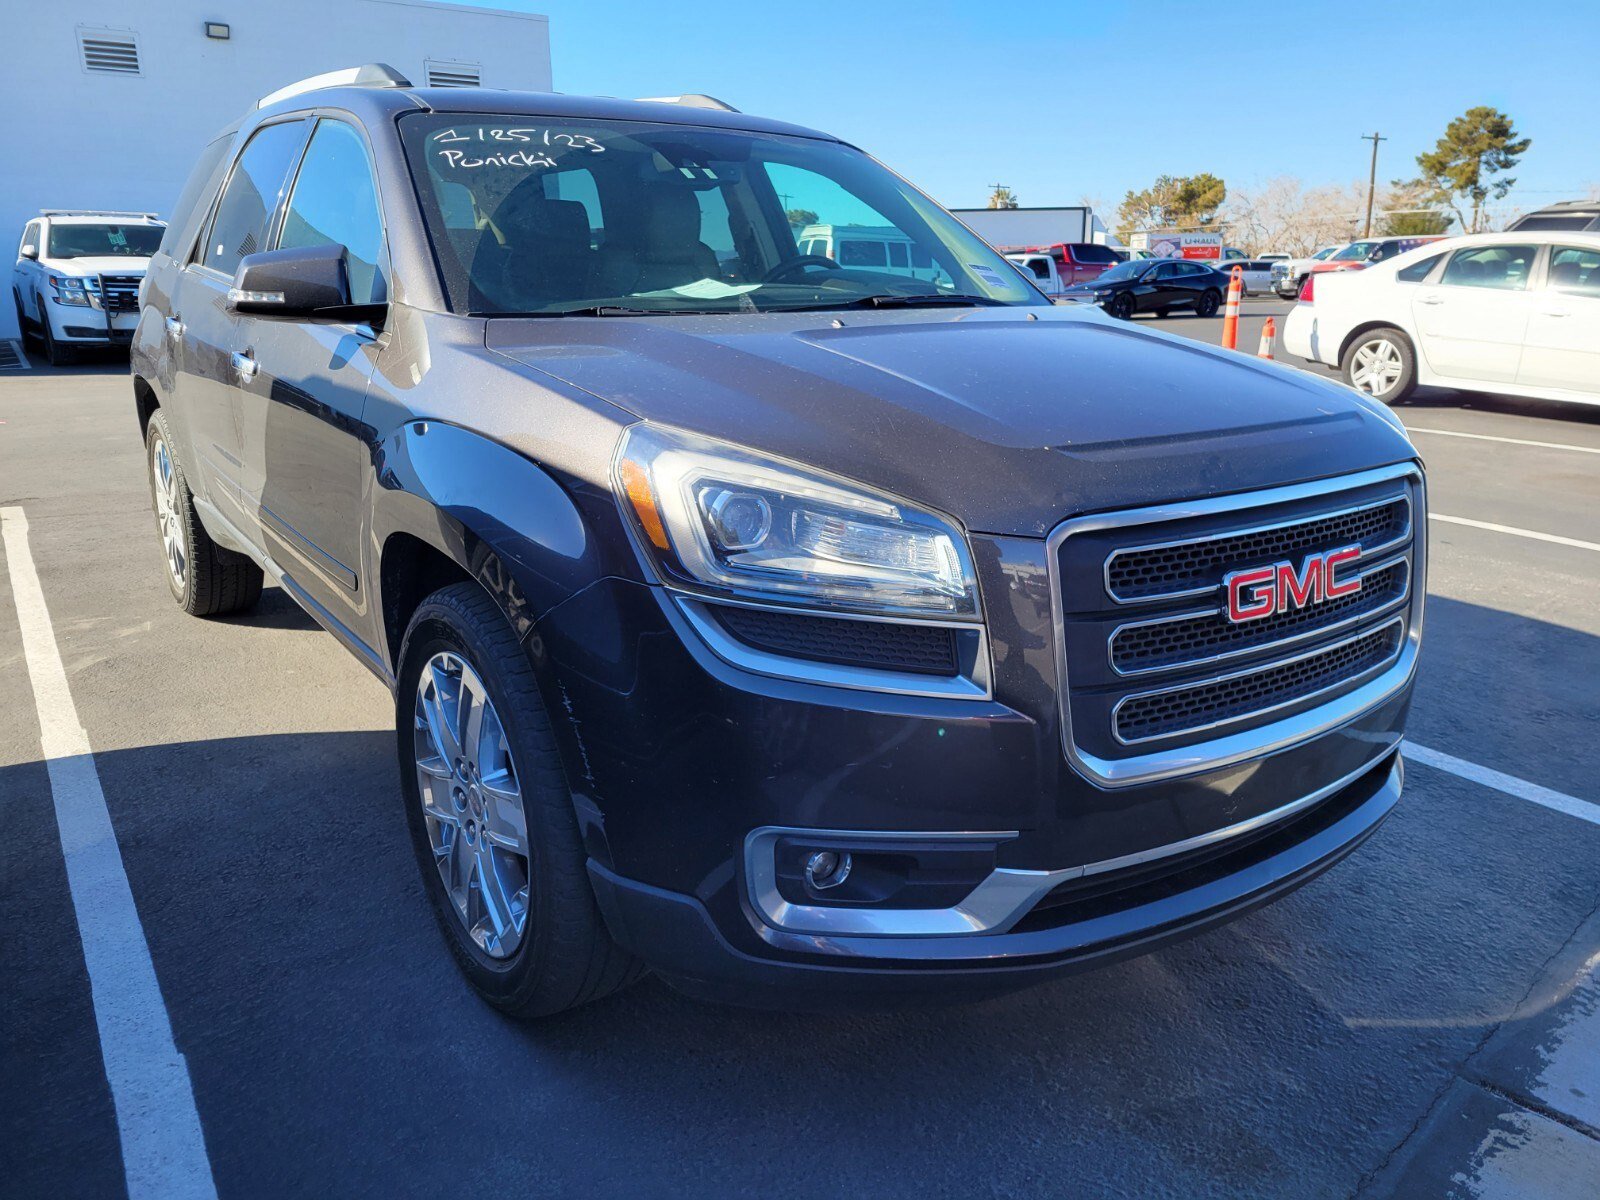 Pre-Owned 2017 GMC Acadia Limited Limited Sport Utility in Las Vegas  #CM01019A | Fairway Chevrolet